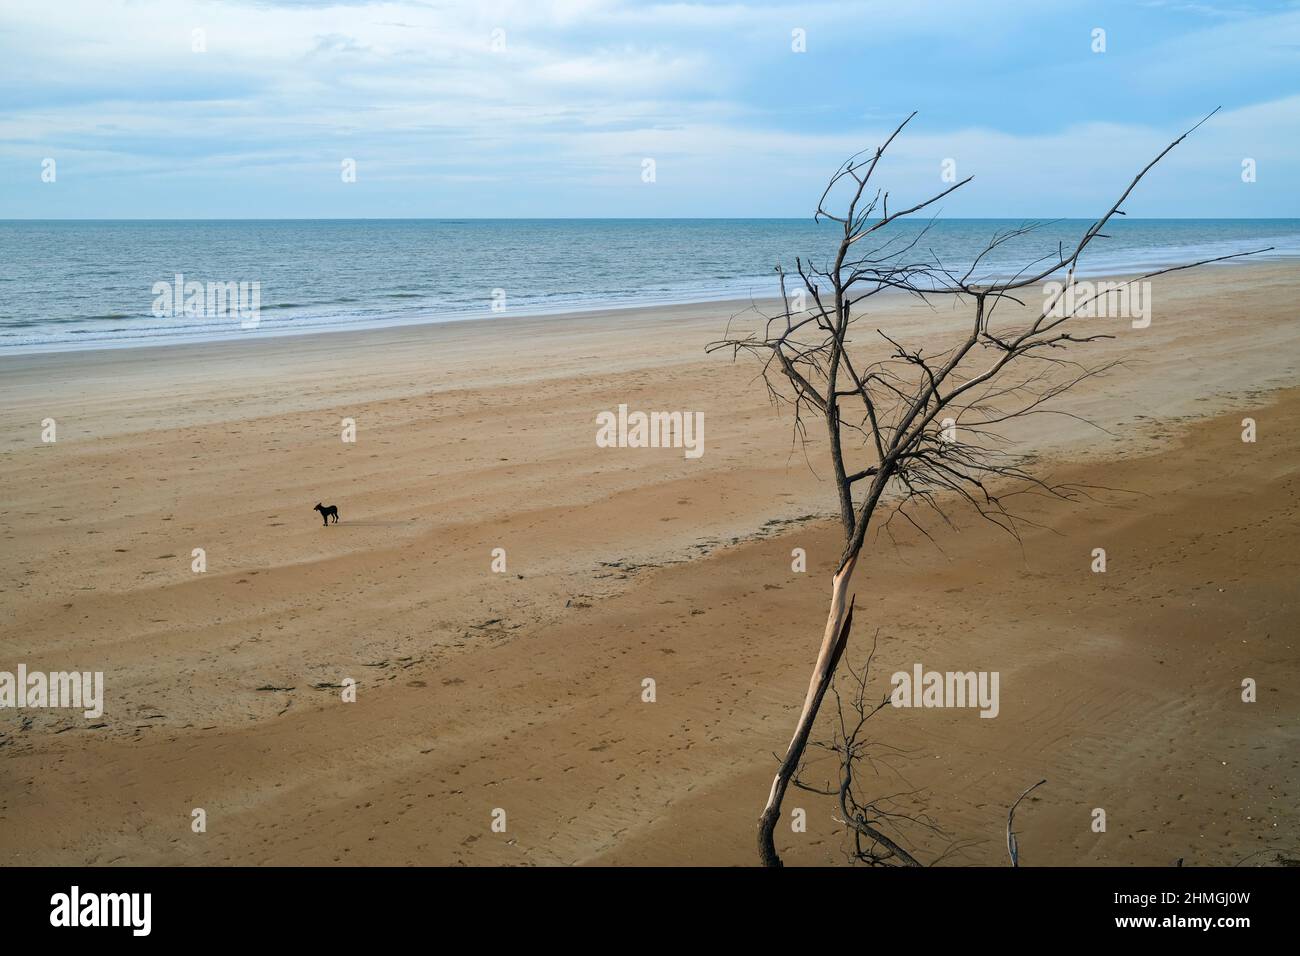 Dog on deserted beach and dead tree Stock Photo